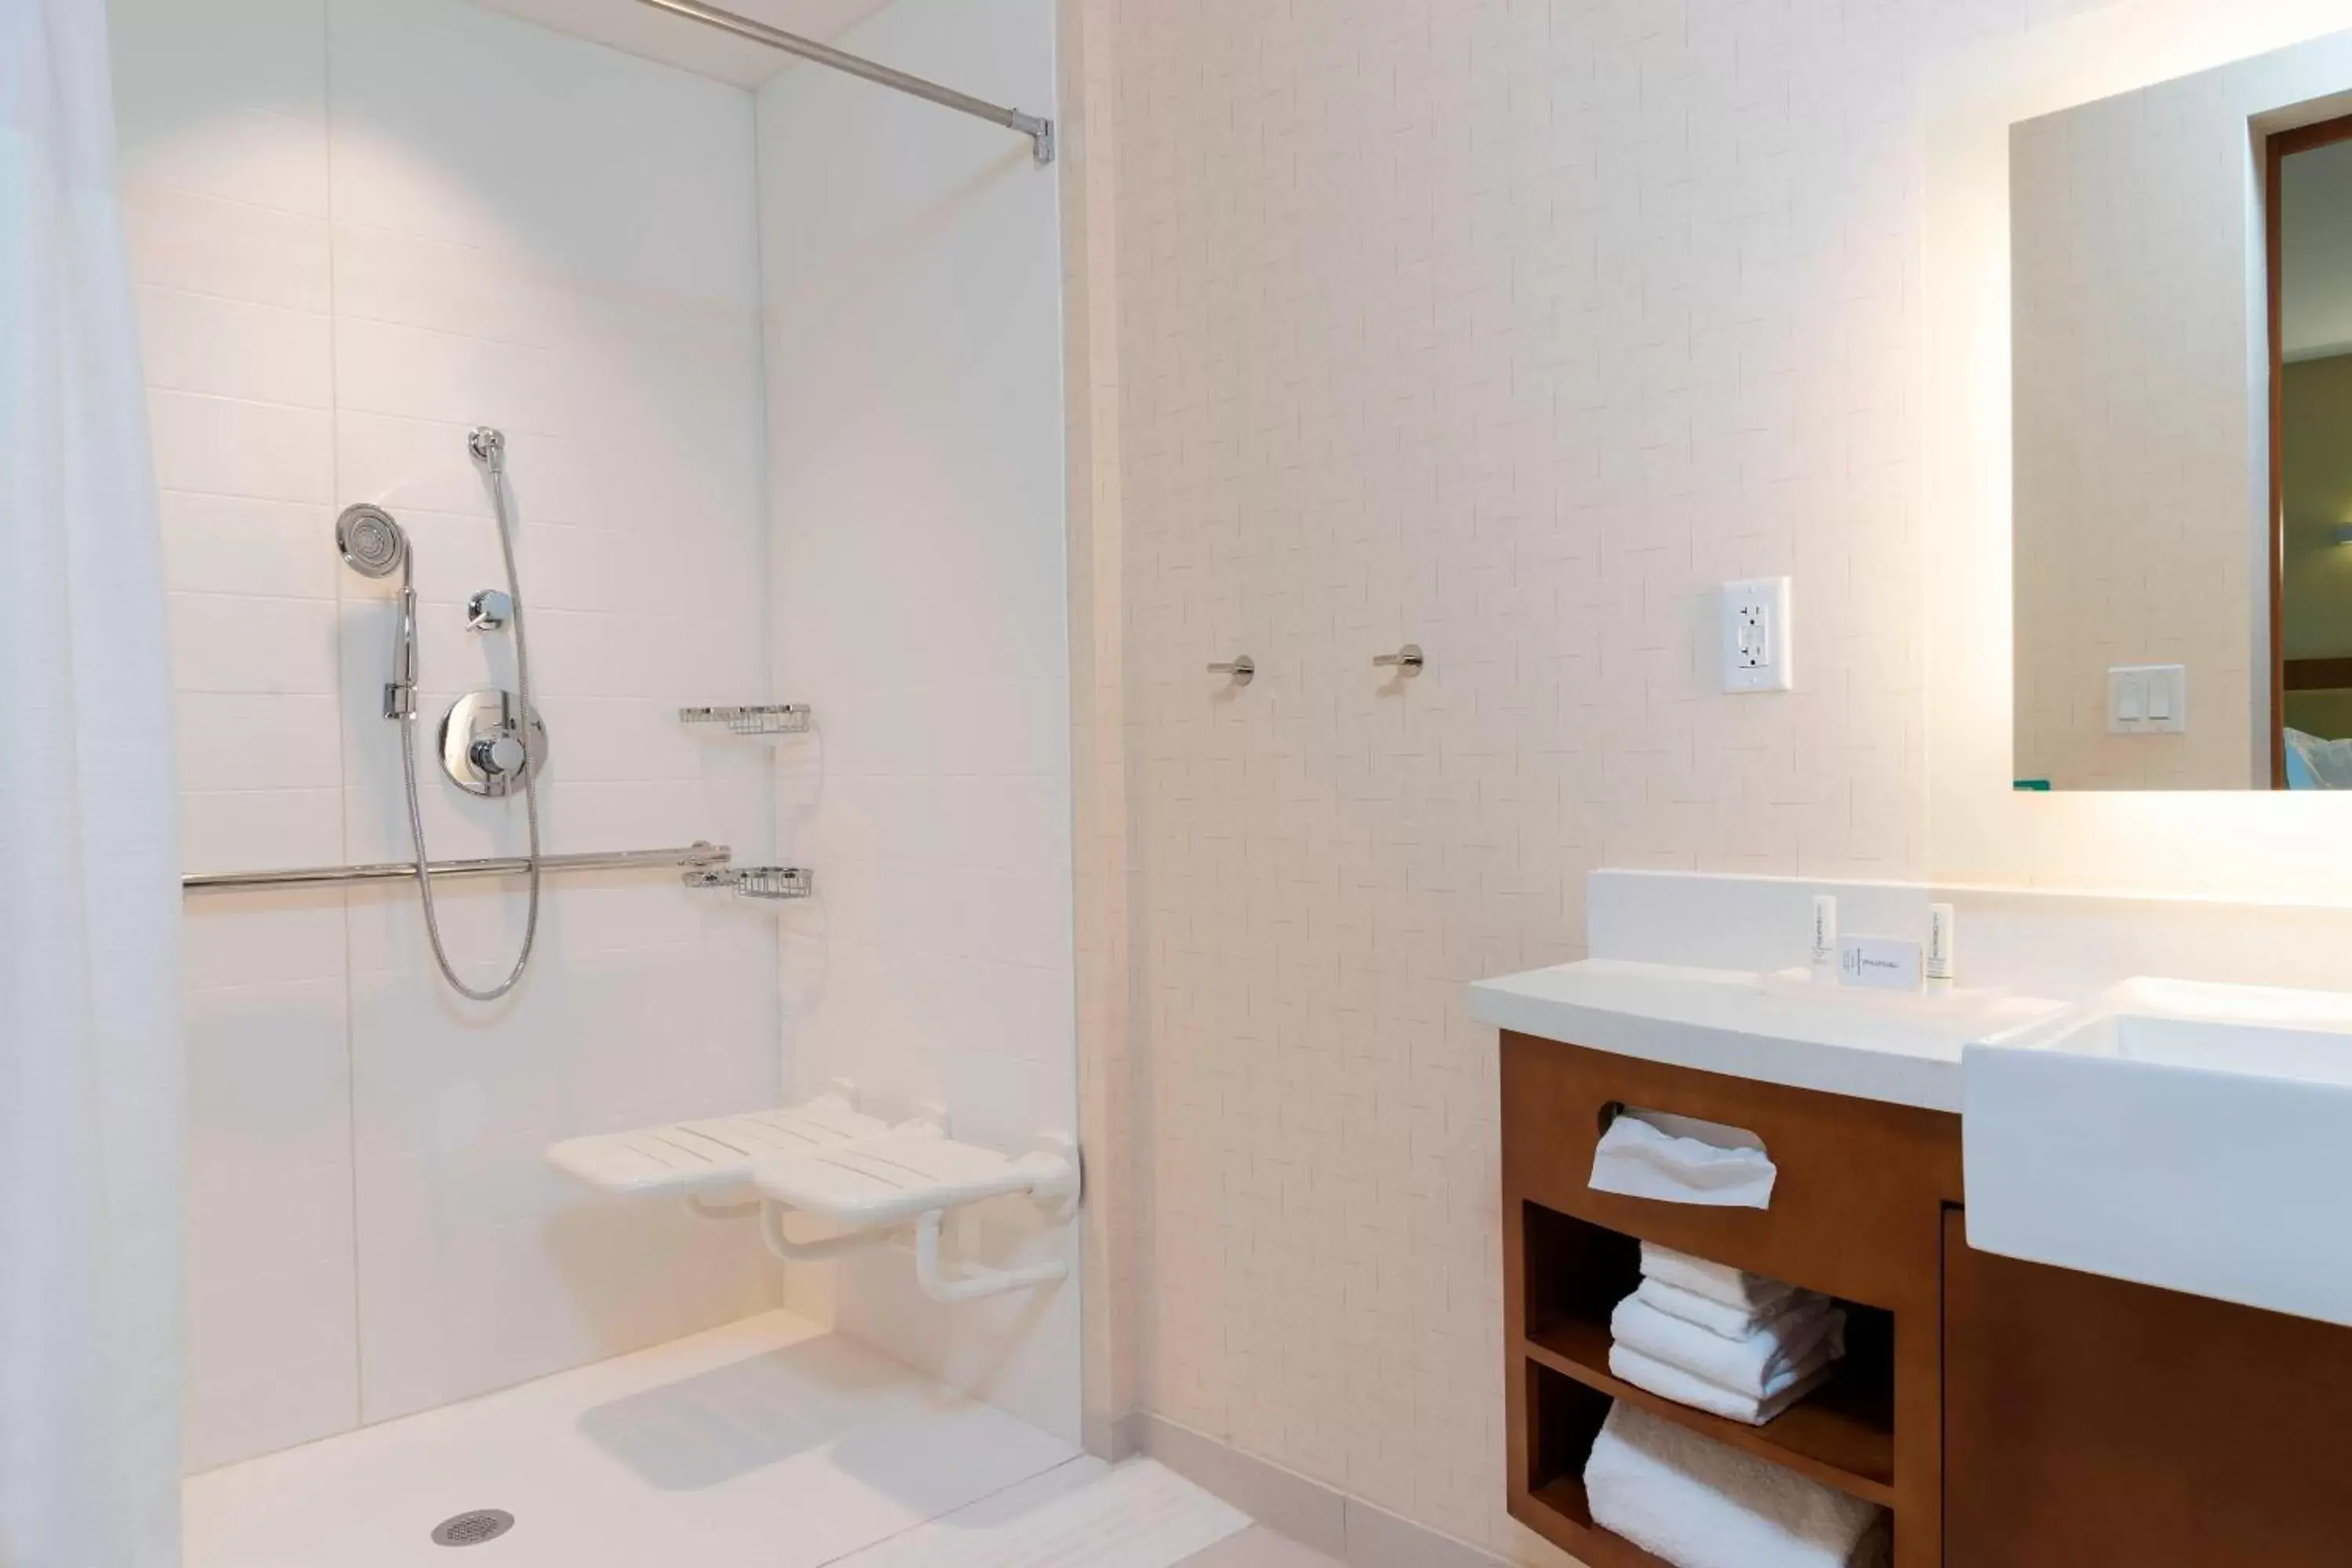 Bathroom in SpringHill Suites by Marriott Chicago Southeast/Munster, IN